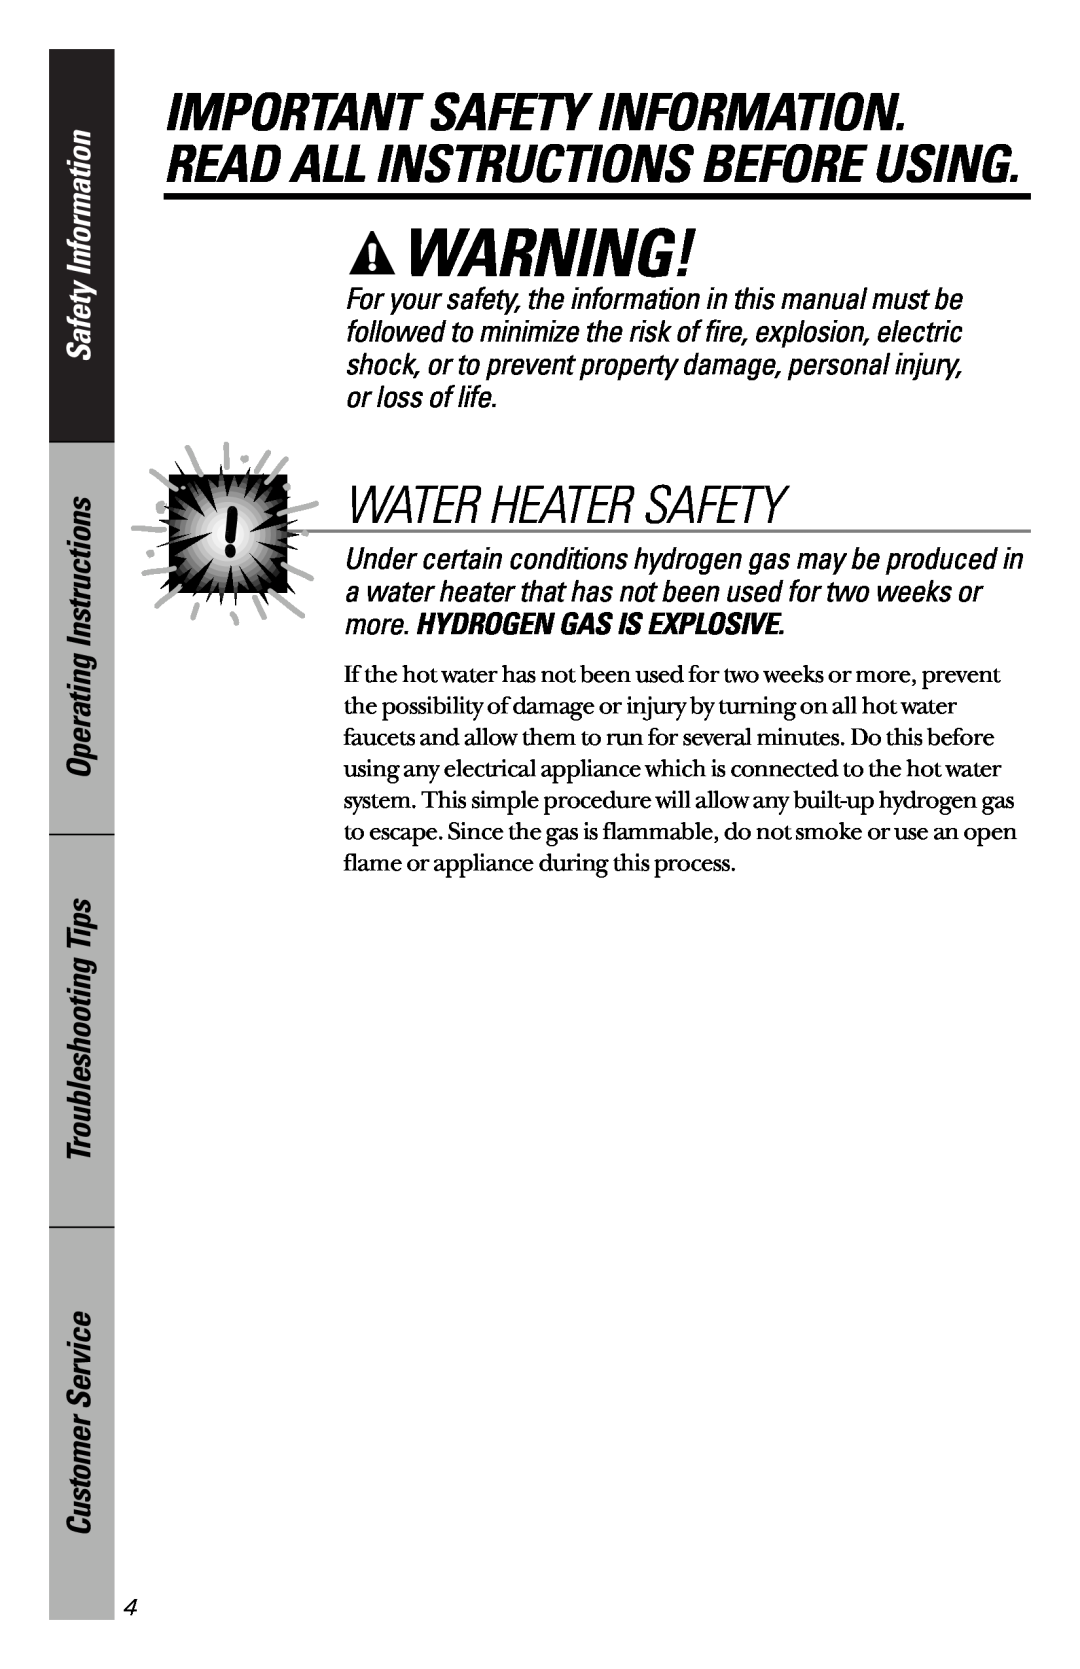 GE GSD4114, GSD4132, GSD4134, GSD4122 Water Heater Safety, Important Safety Information. Read All Instructions Before Using 